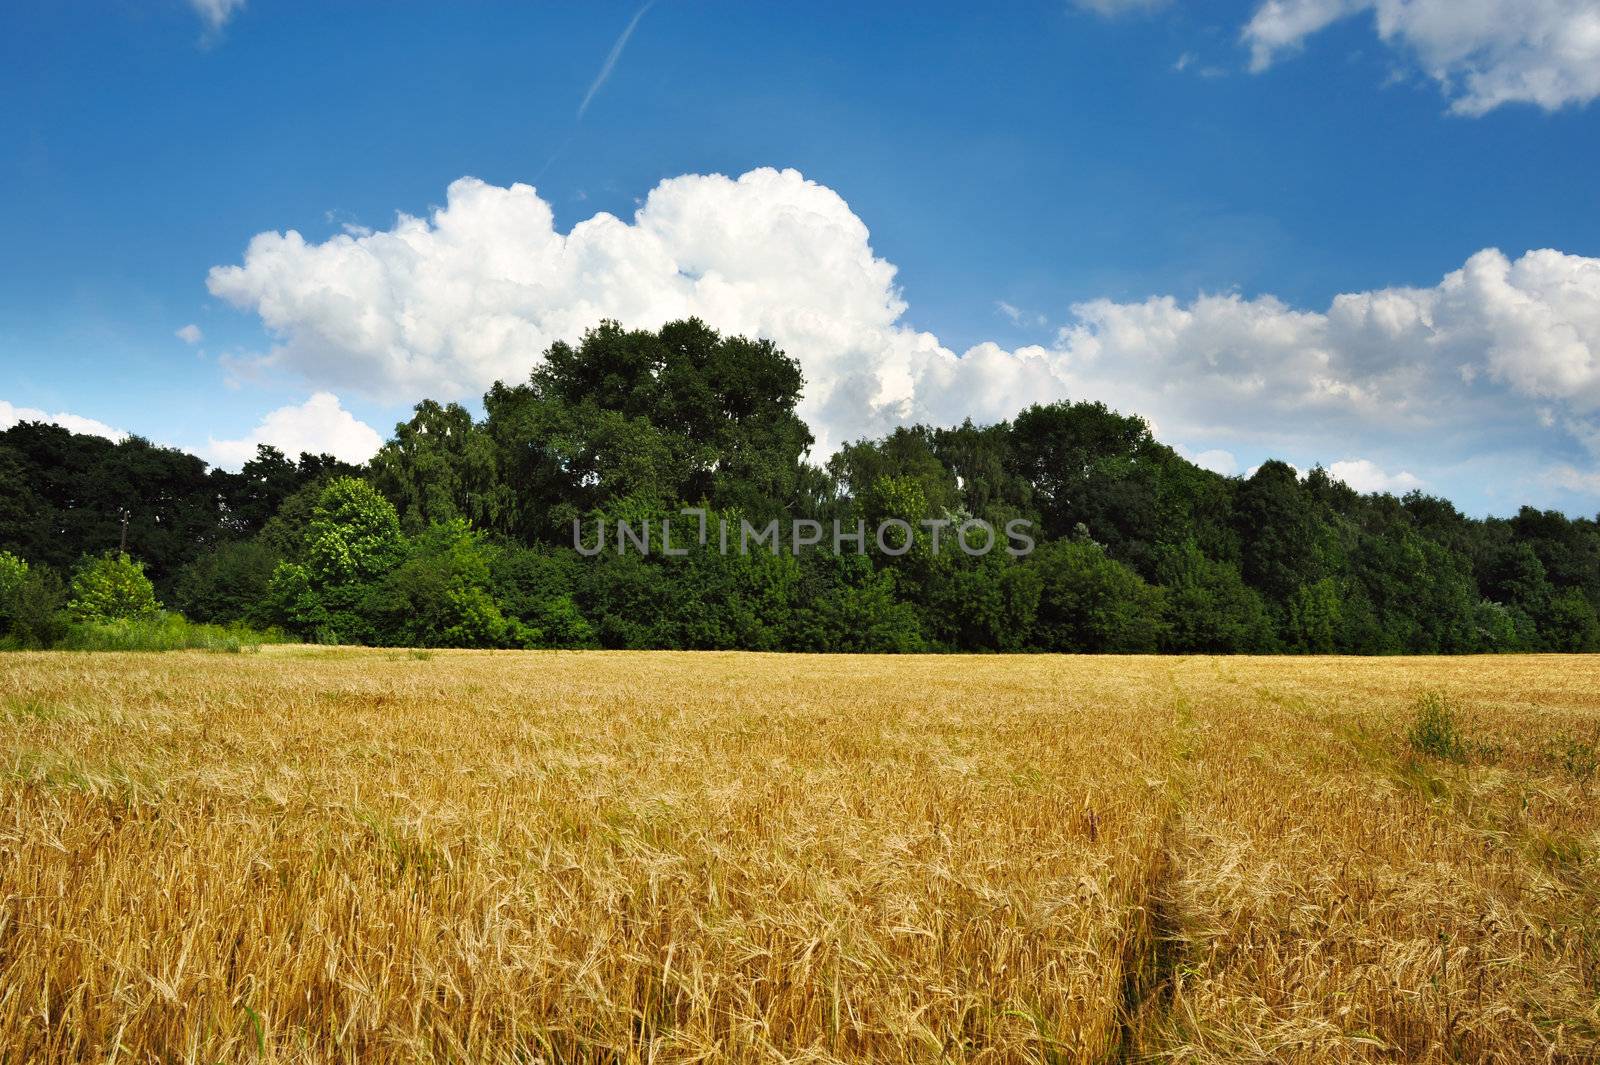 An image of a beautiful summer field of wheat